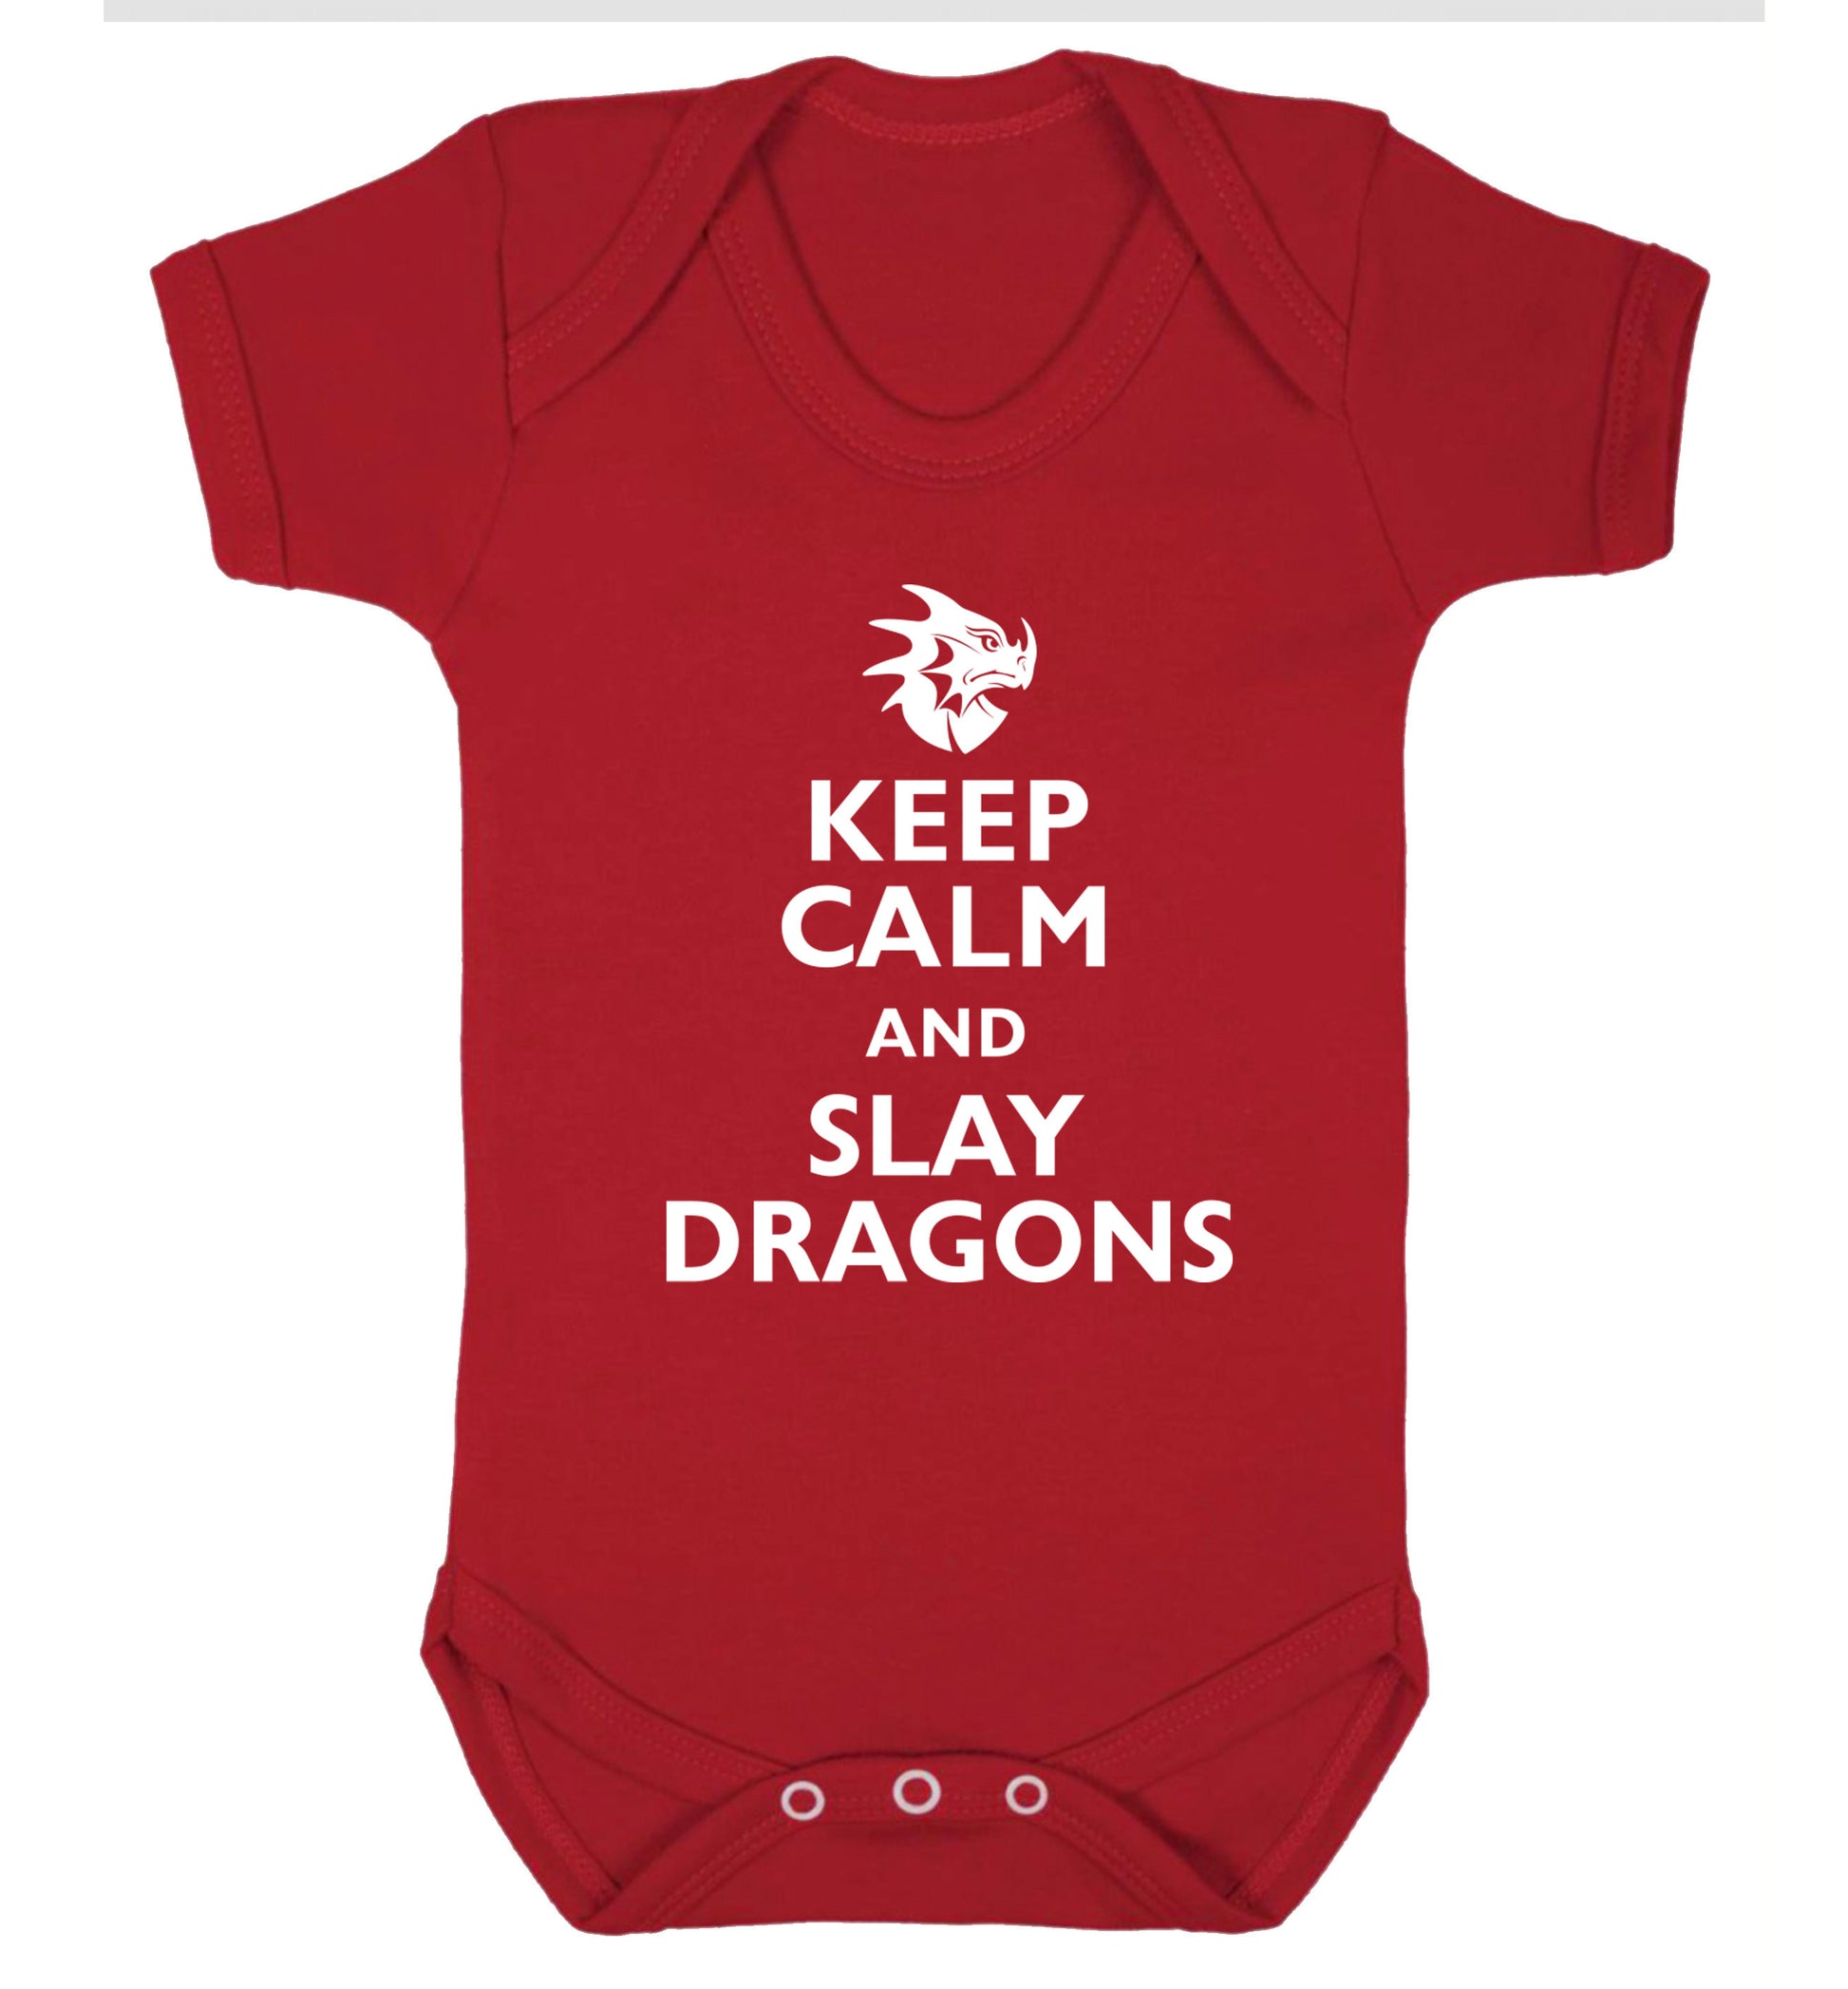 Keep calm and slay dragons Baby Vest red 18-24 months